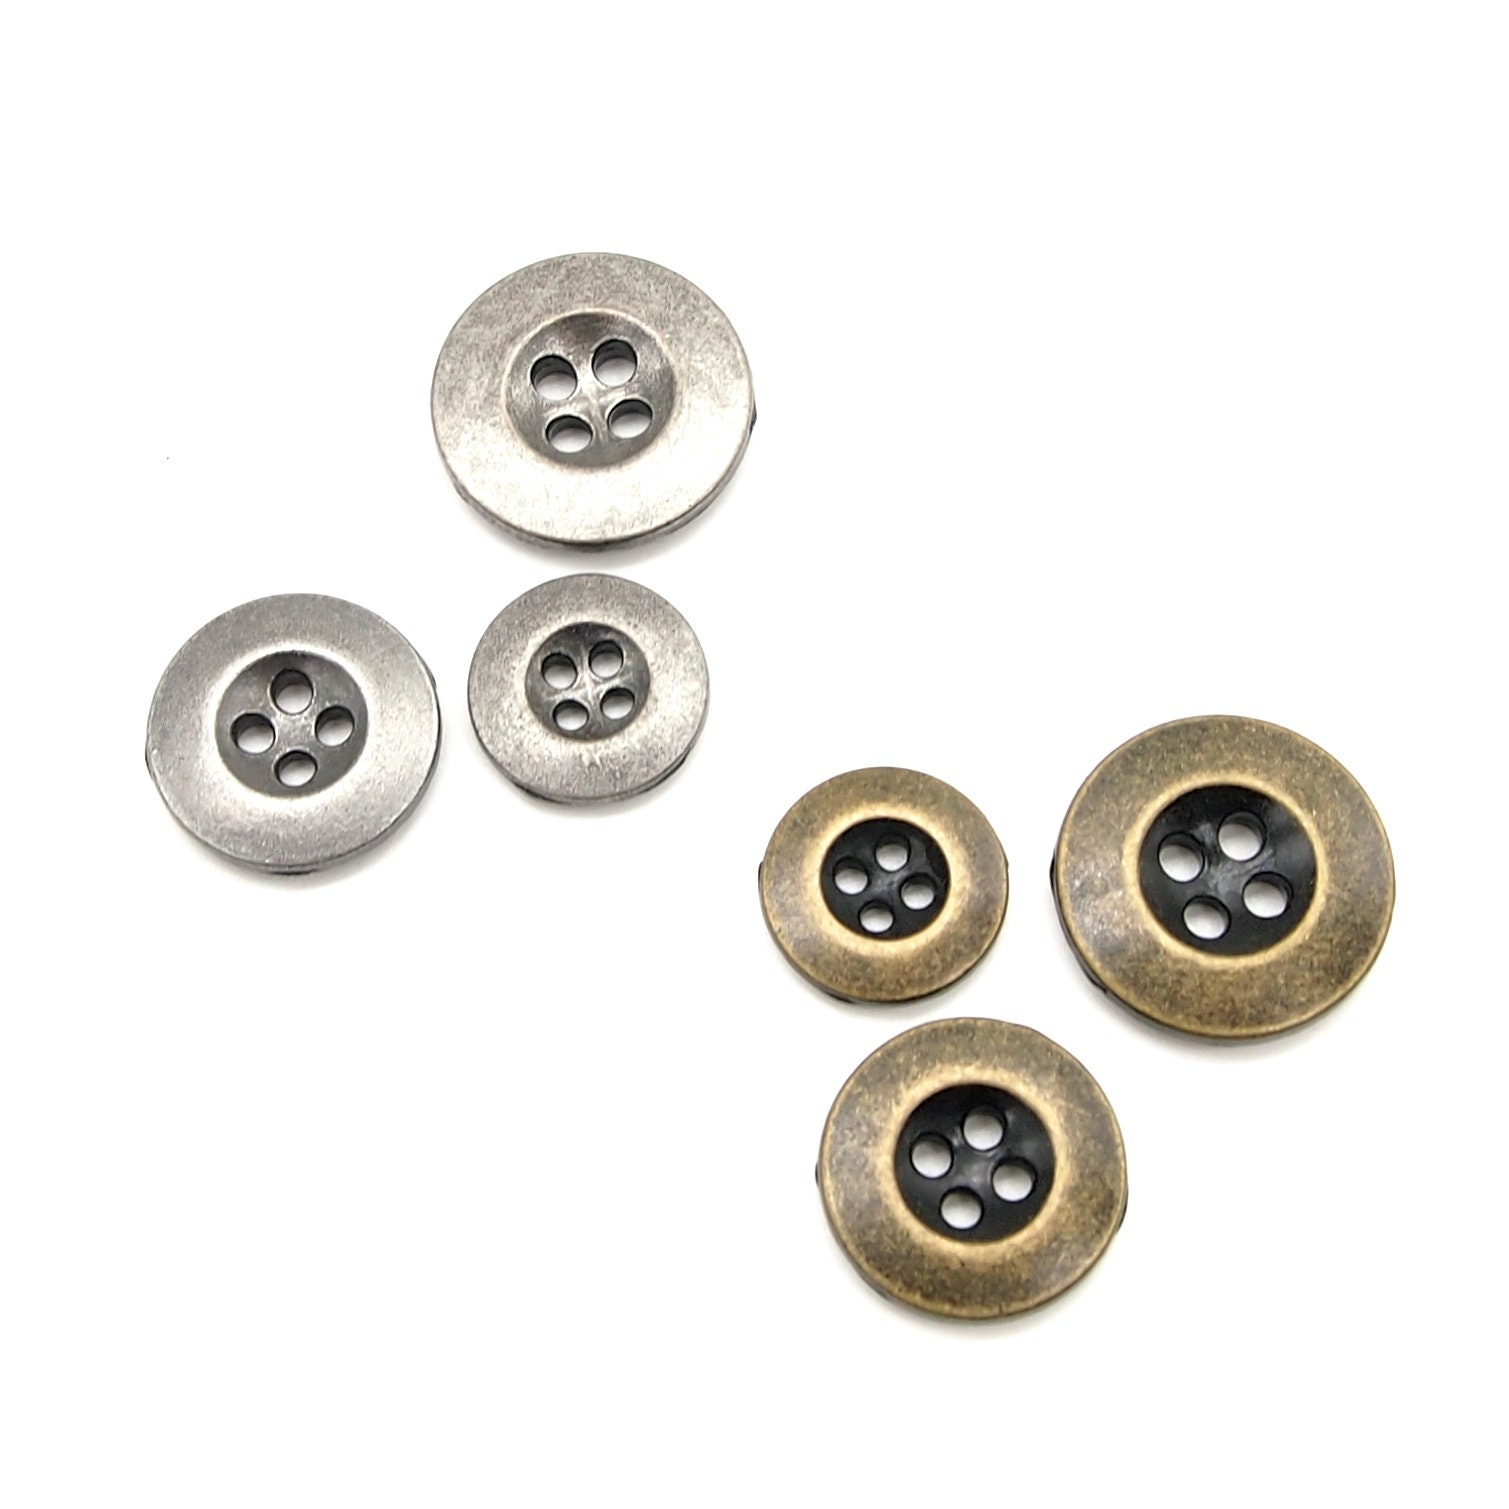 Aapal Collection Jeans Button 20 mm Metal Buttons Price in India